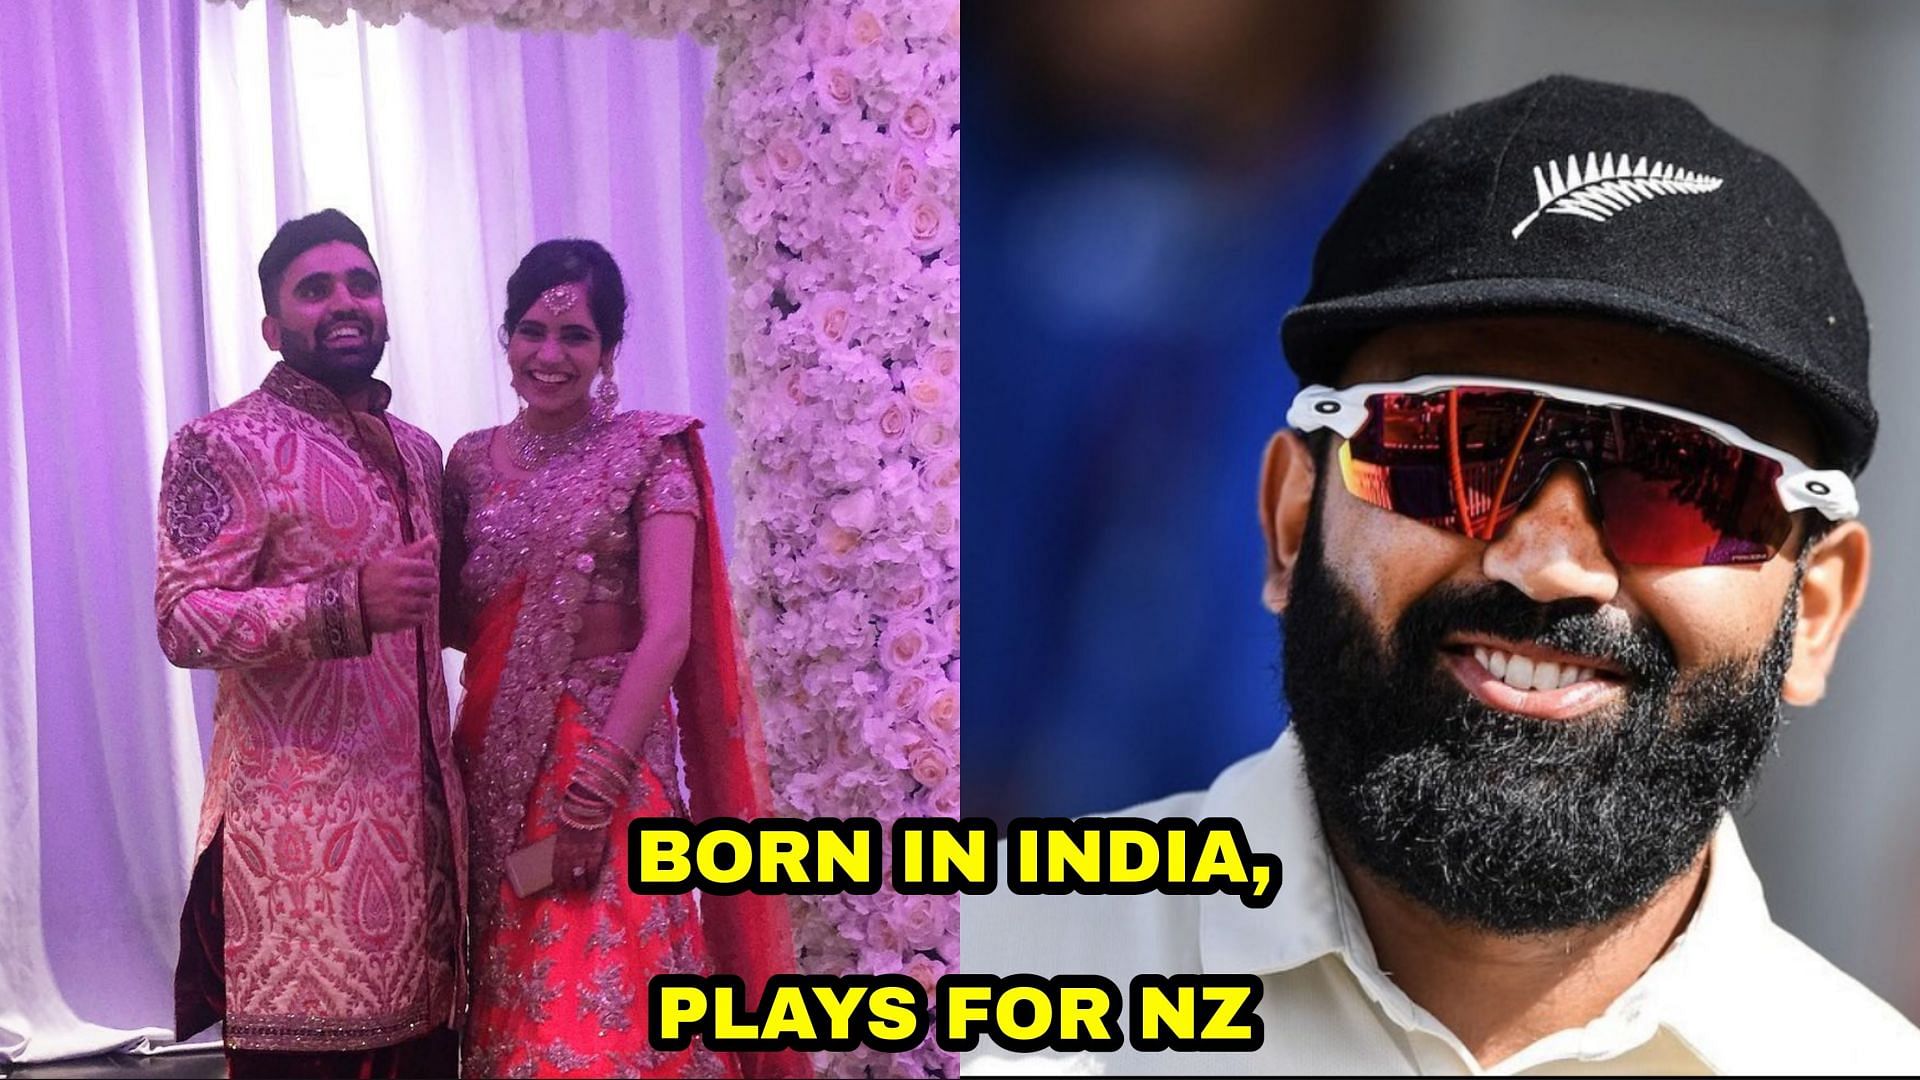 Ajaz Patel was born in India but he will play against India in the upcoming days